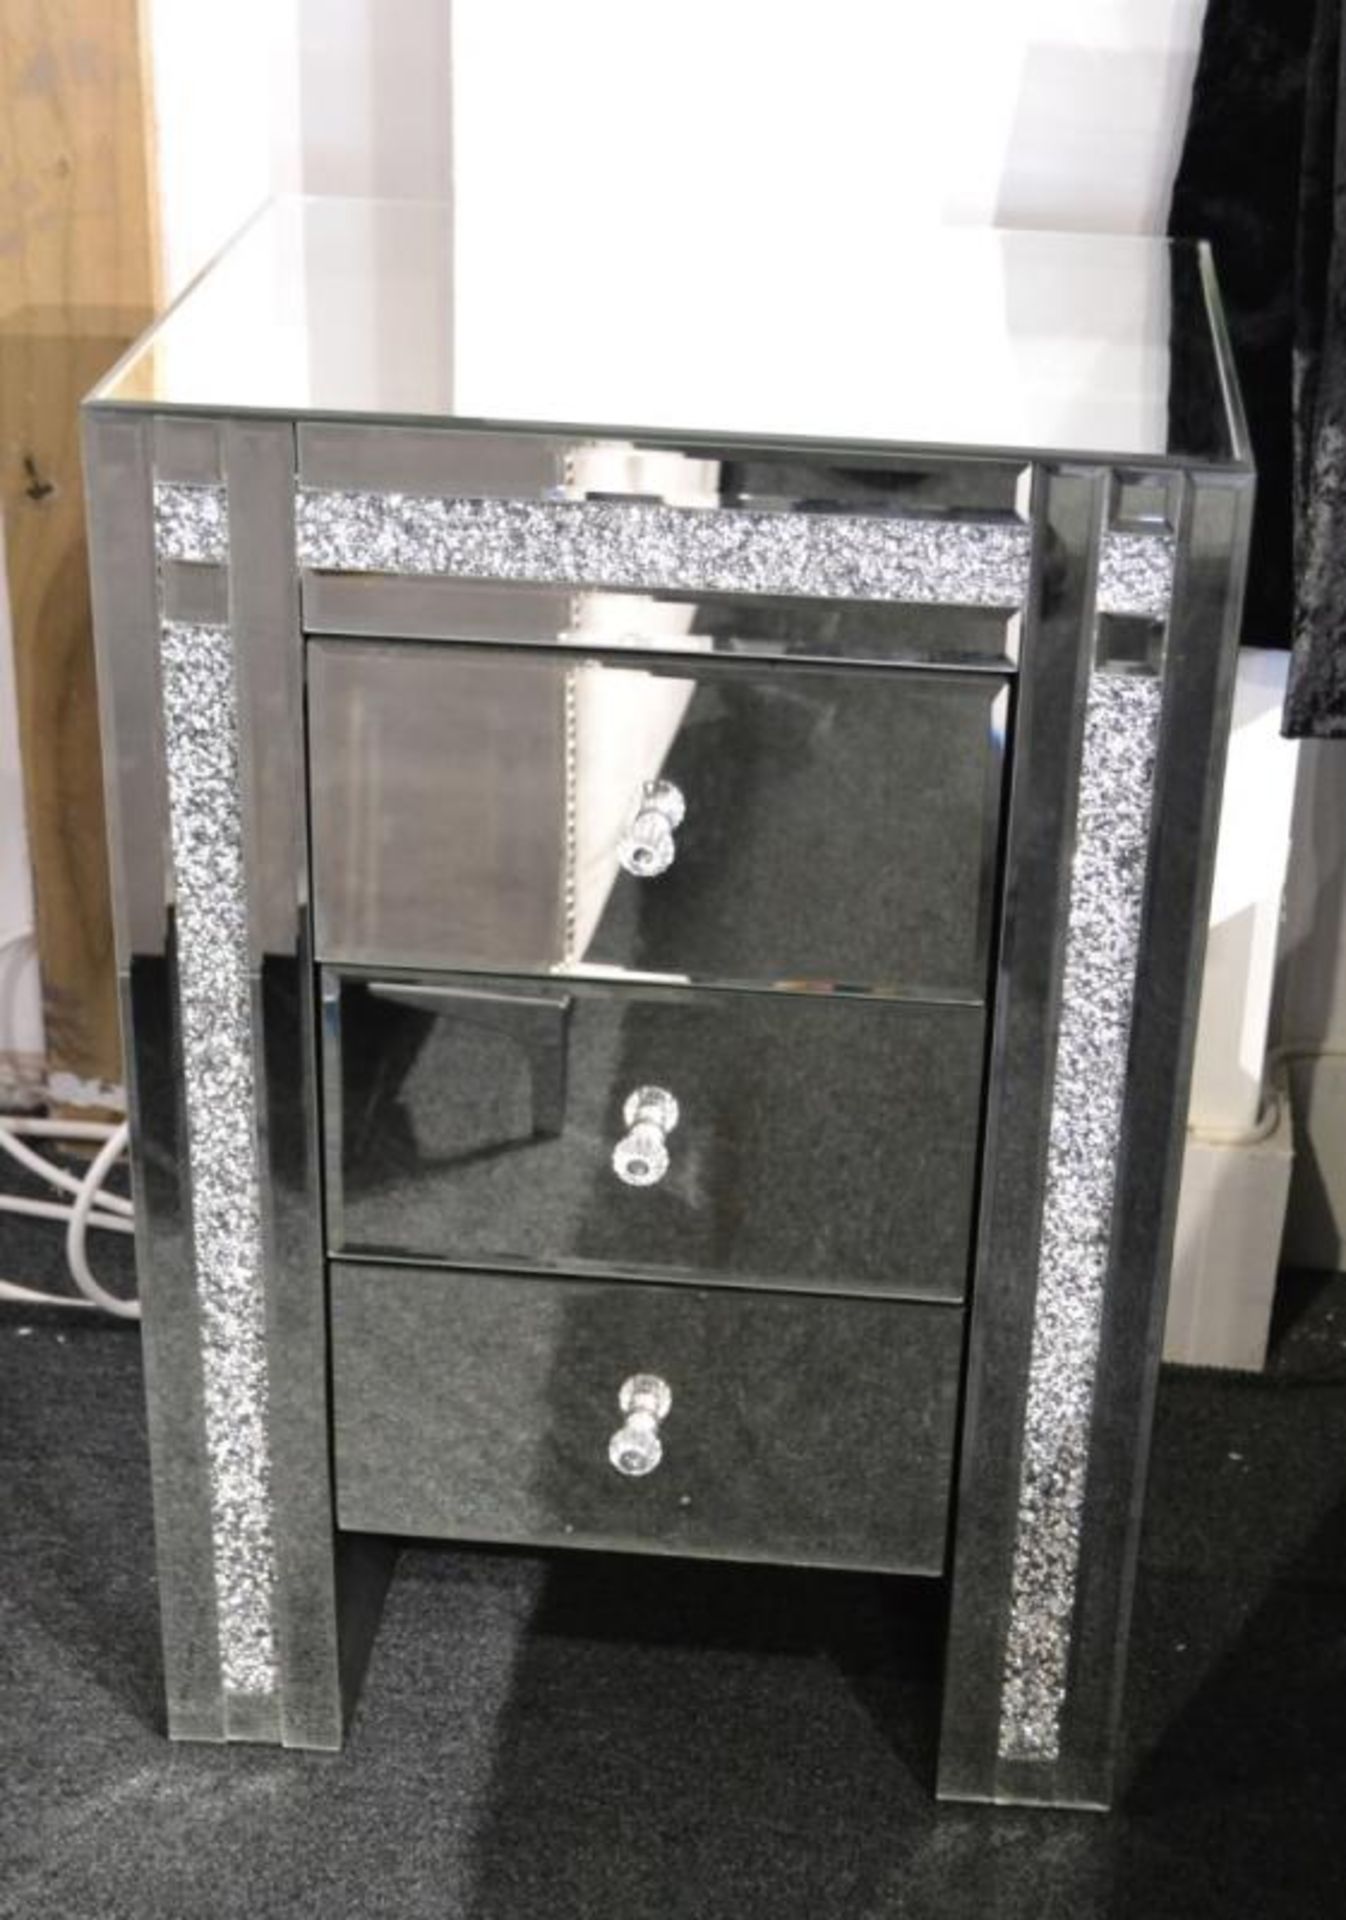 1 x Beautiful Mirrored Side Table With Crystal Encrusted Detail. A special piece that can go in any